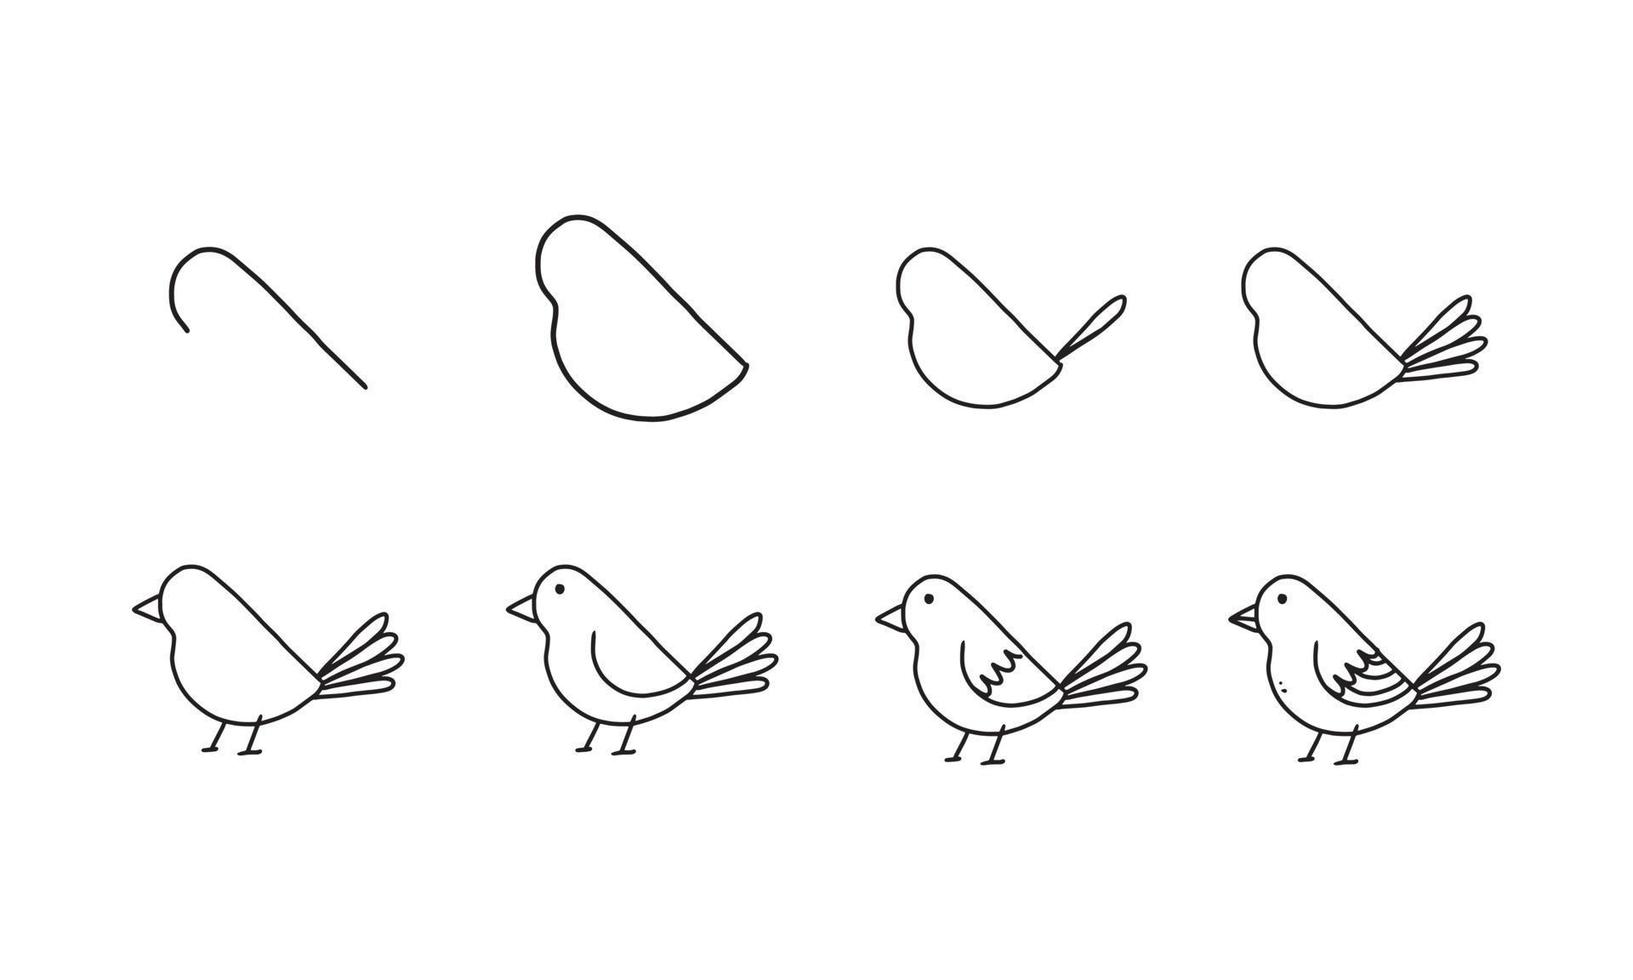 how to draw a cute bird step by step. pets animal cartoon coloring  character collection for kids. easy funny animal drawing illustration for  kids creativity. drawing guide book in vector design. 4681997